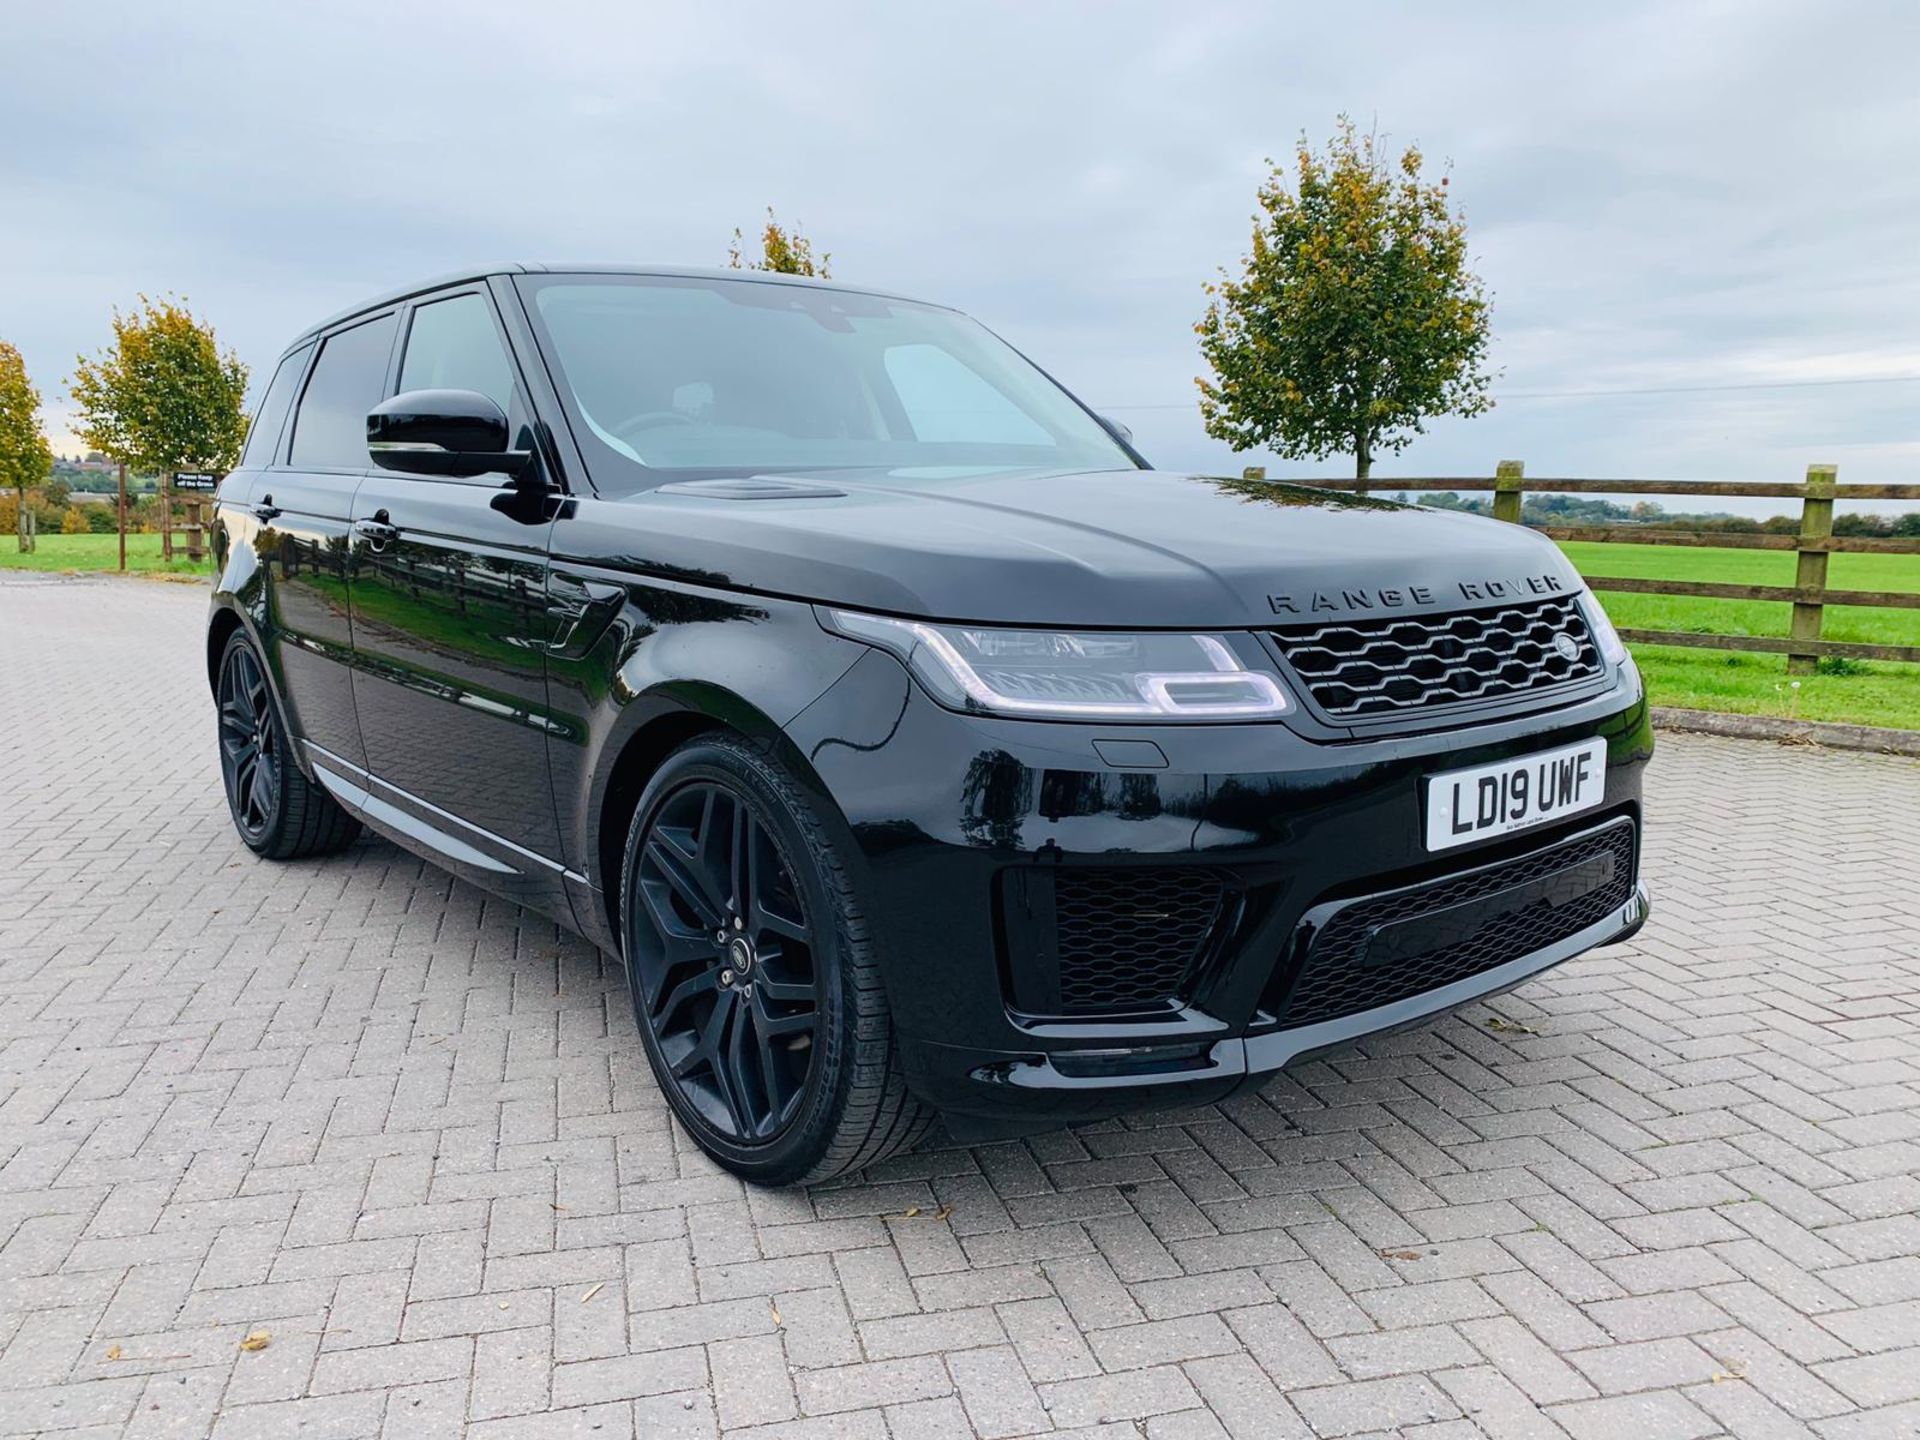 (RESERVE MET) Range Rover Sport 3.0 SDV6 HSE Auto - 2019 19 Reg - 1 Keeper From New - STUNNING CAR - Image 3 of 36